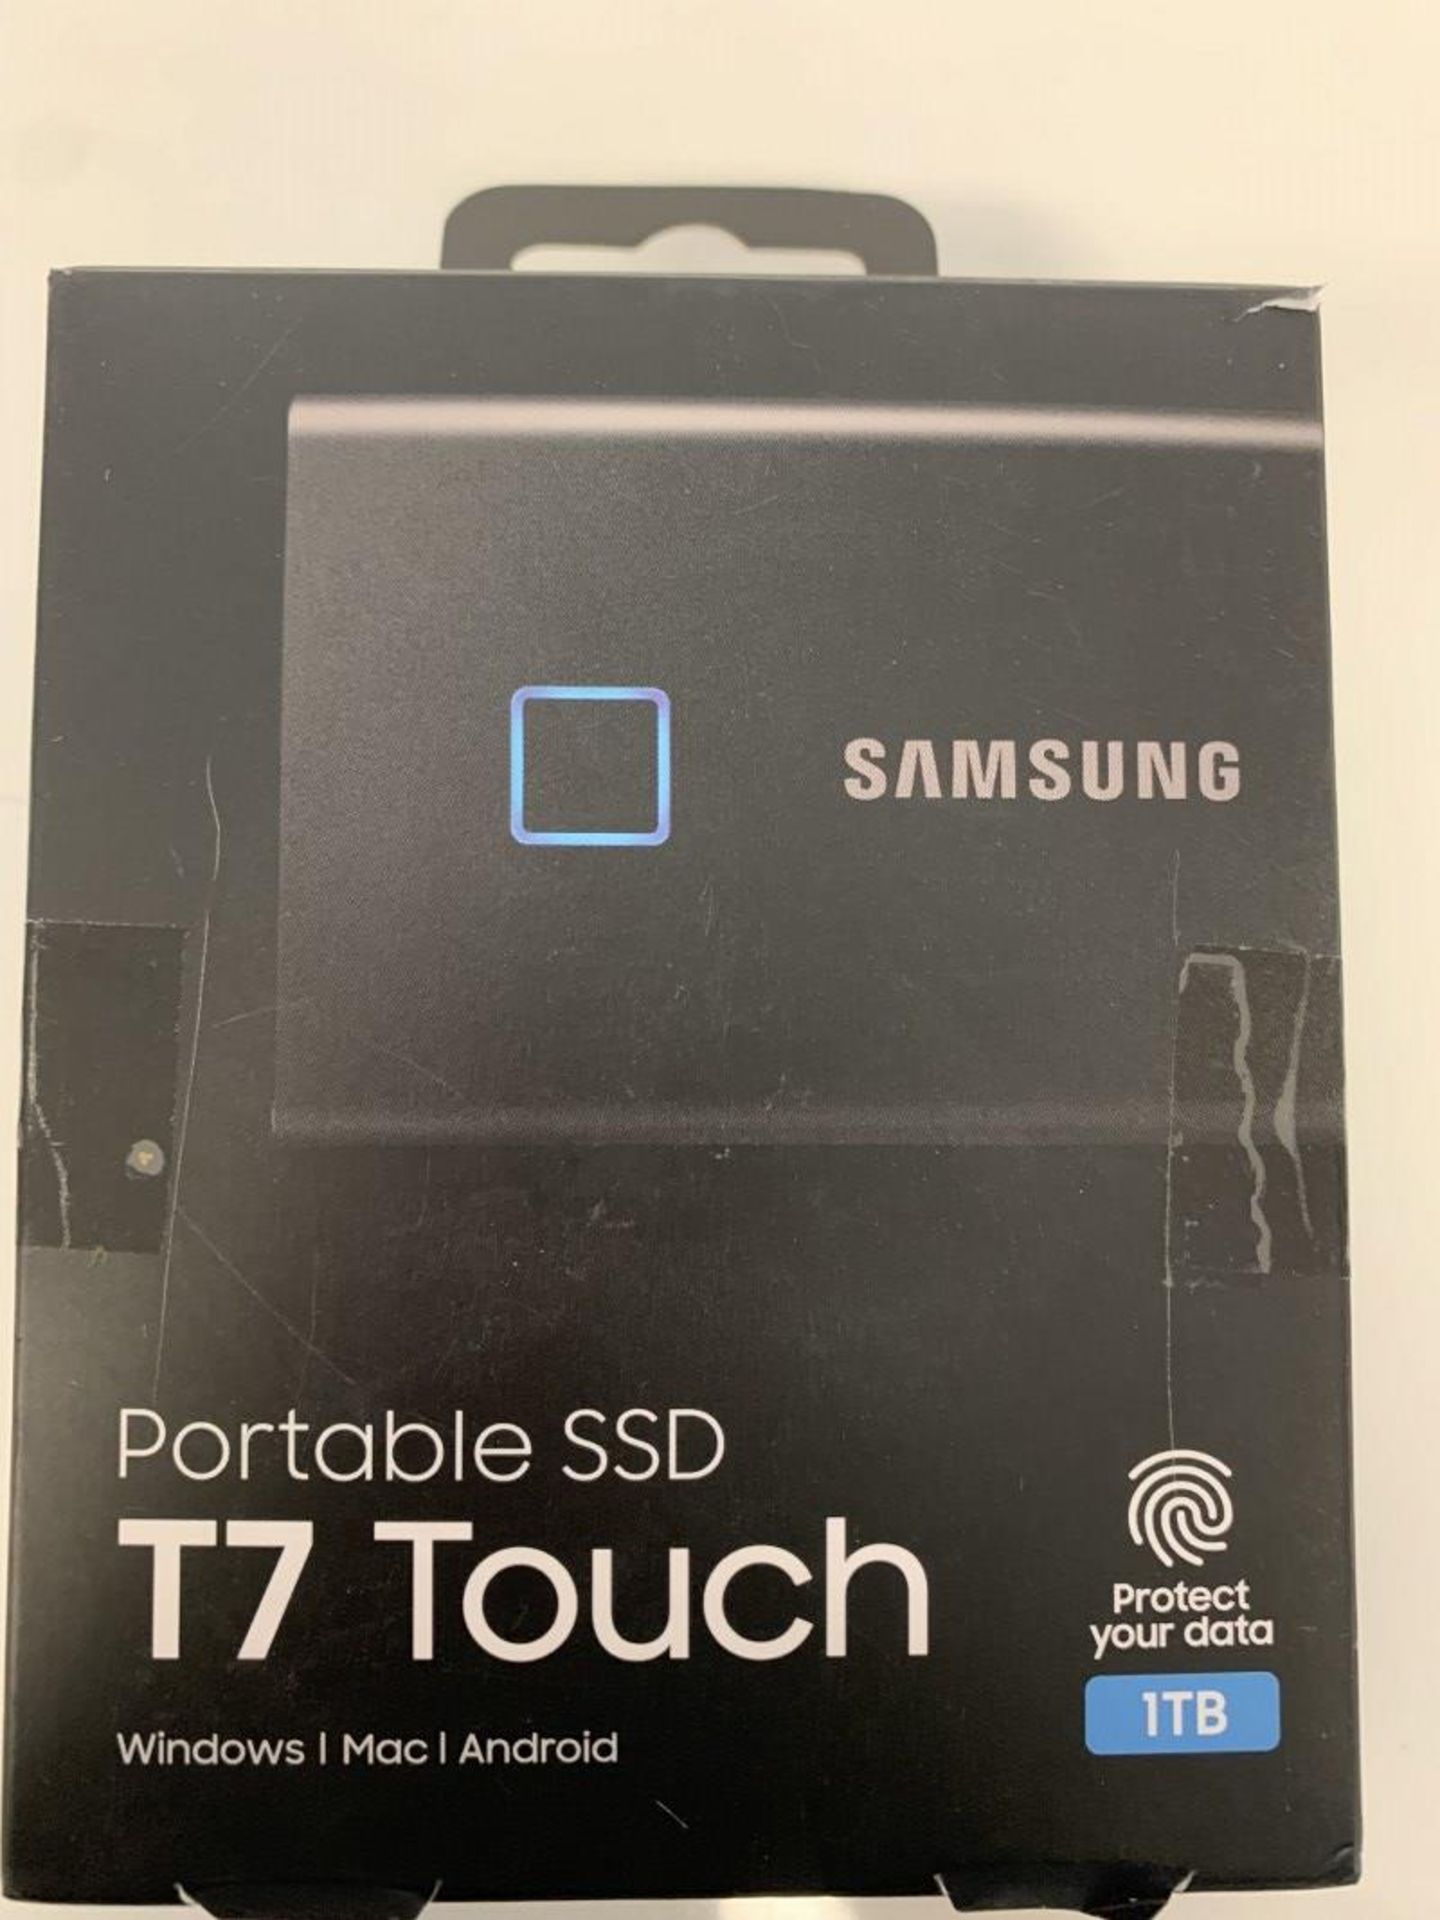 Samsung - Portable Ssd - T7 Touch - 1Tb - Image 2 of 2